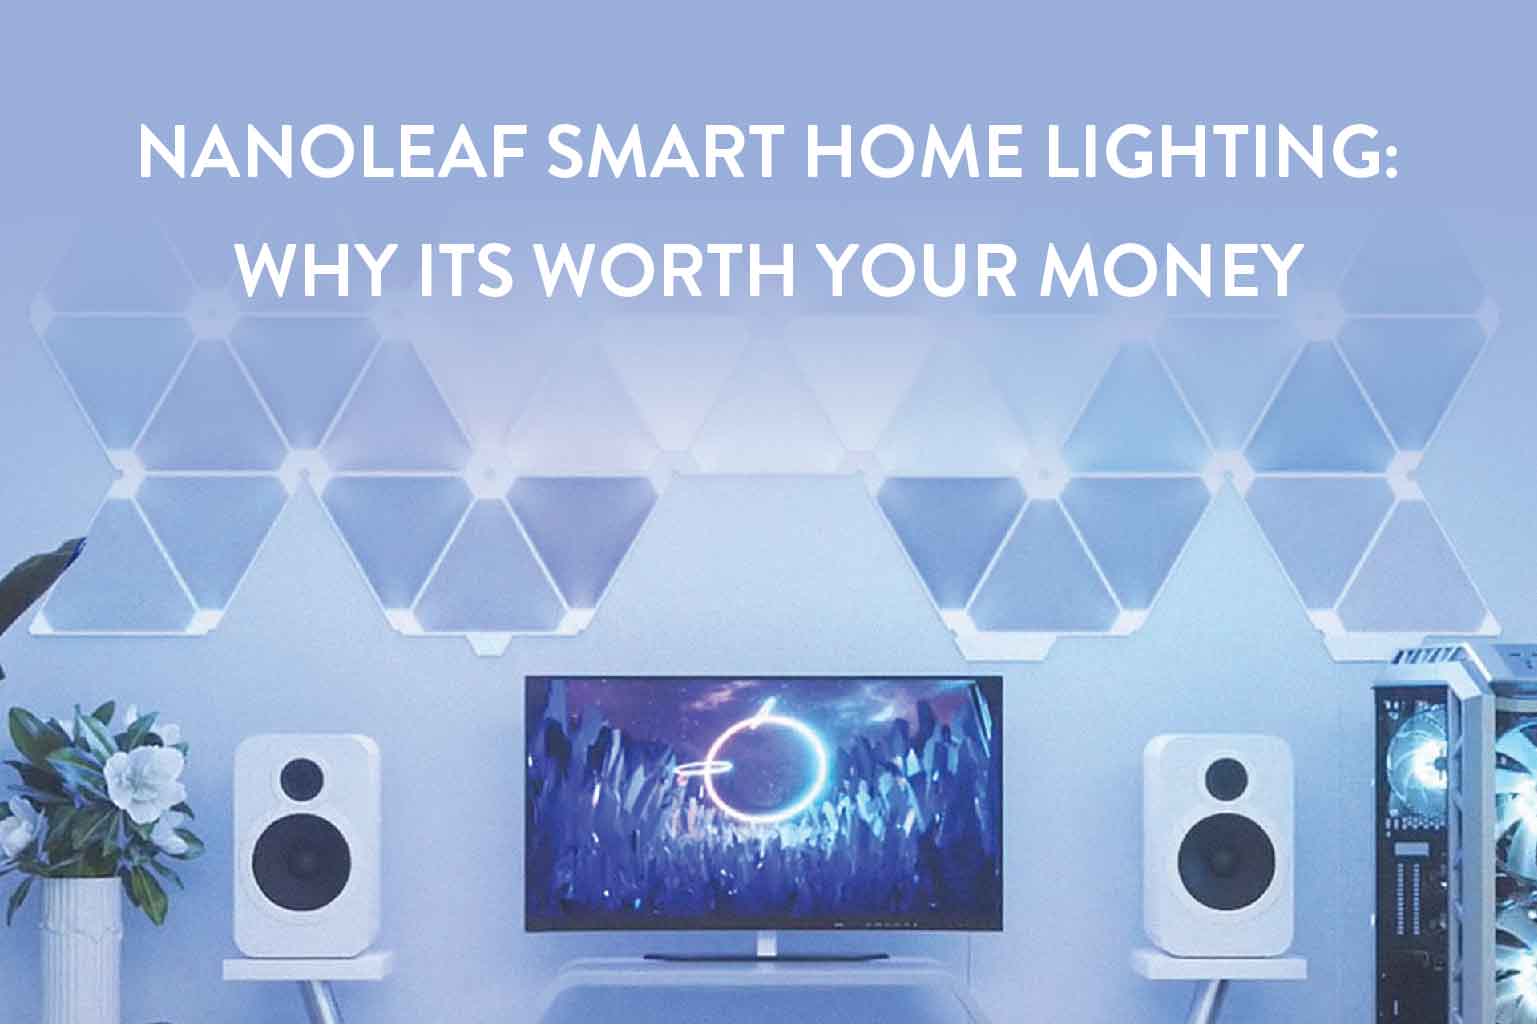 Nanoleaf Smart Home Lighting: Why It's Worth Your Money